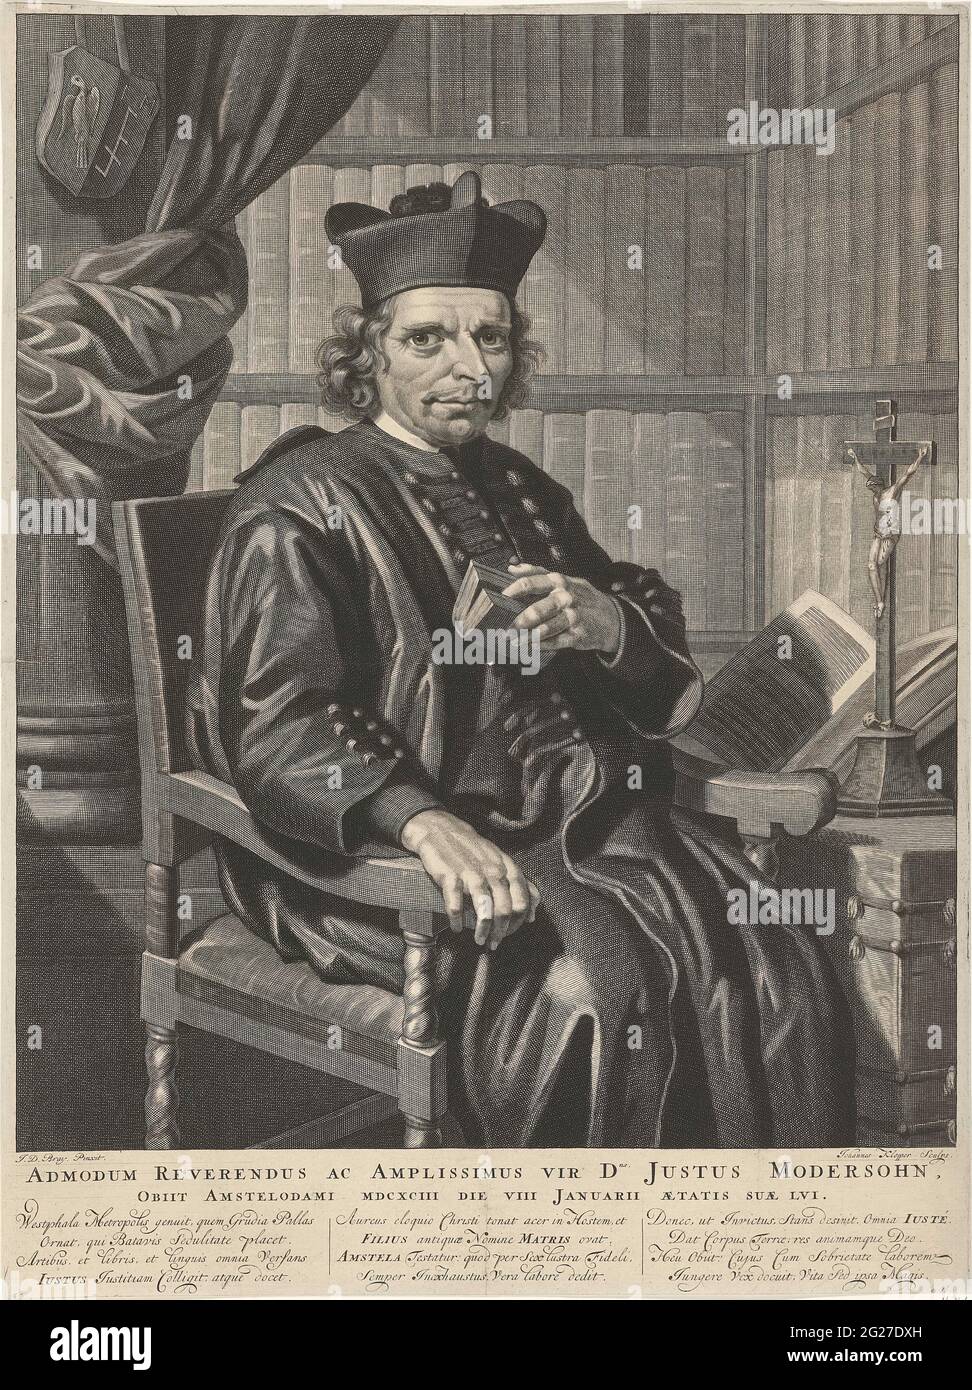 Portrait of the Pastor Justus Modernohn; Admodum reverendus AC Amplissimus vir DNS Justus Modernohn, Obiit Amstelodami MDCXCIII Die VIII Januaryi Aetatis Suae Lvi. Junction by Justus Modernohn, Pastoor in Amsterdam. Behind Moldohn a cupboard full of books and next to him a table with a crucifix and a opened book on it. He is wearing a gown and holds a book in his left hand. Below the image a twelve-line Latin text in three columns. Stock Photo